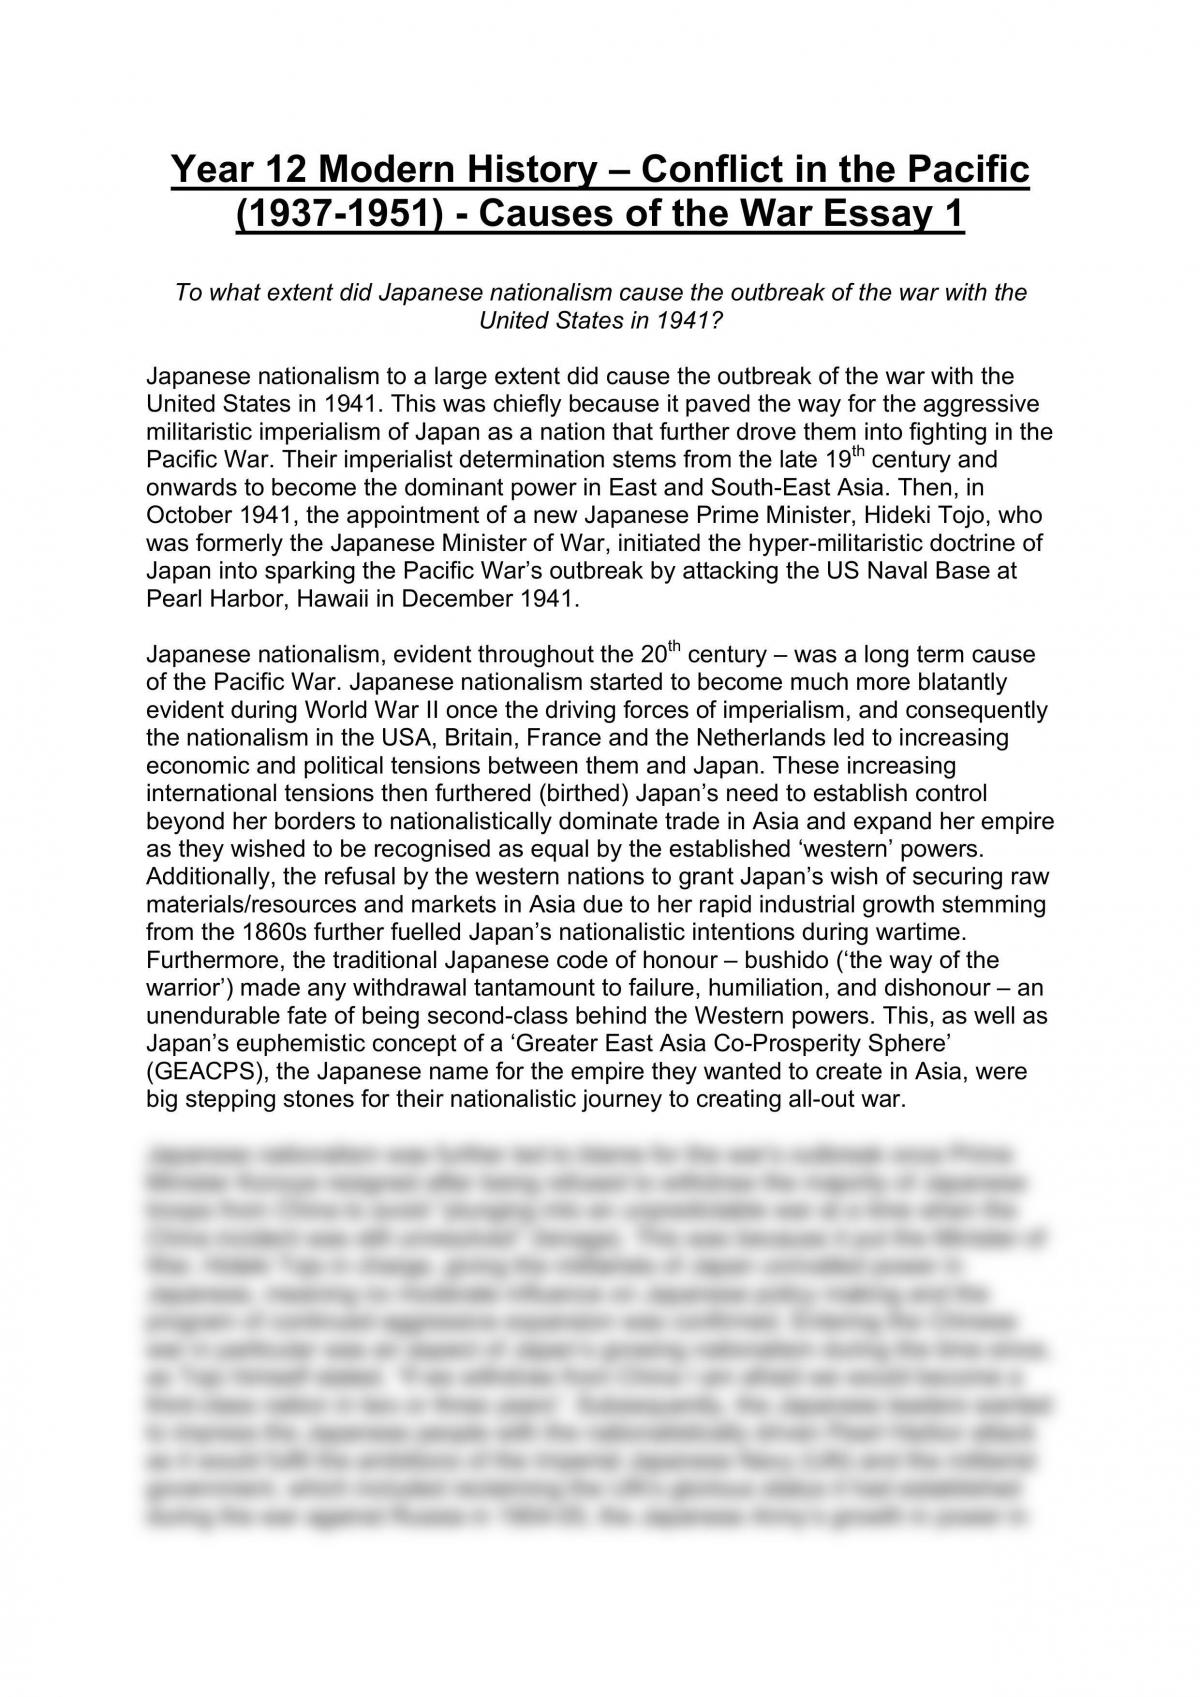 peace war and defense essays in peace research ii